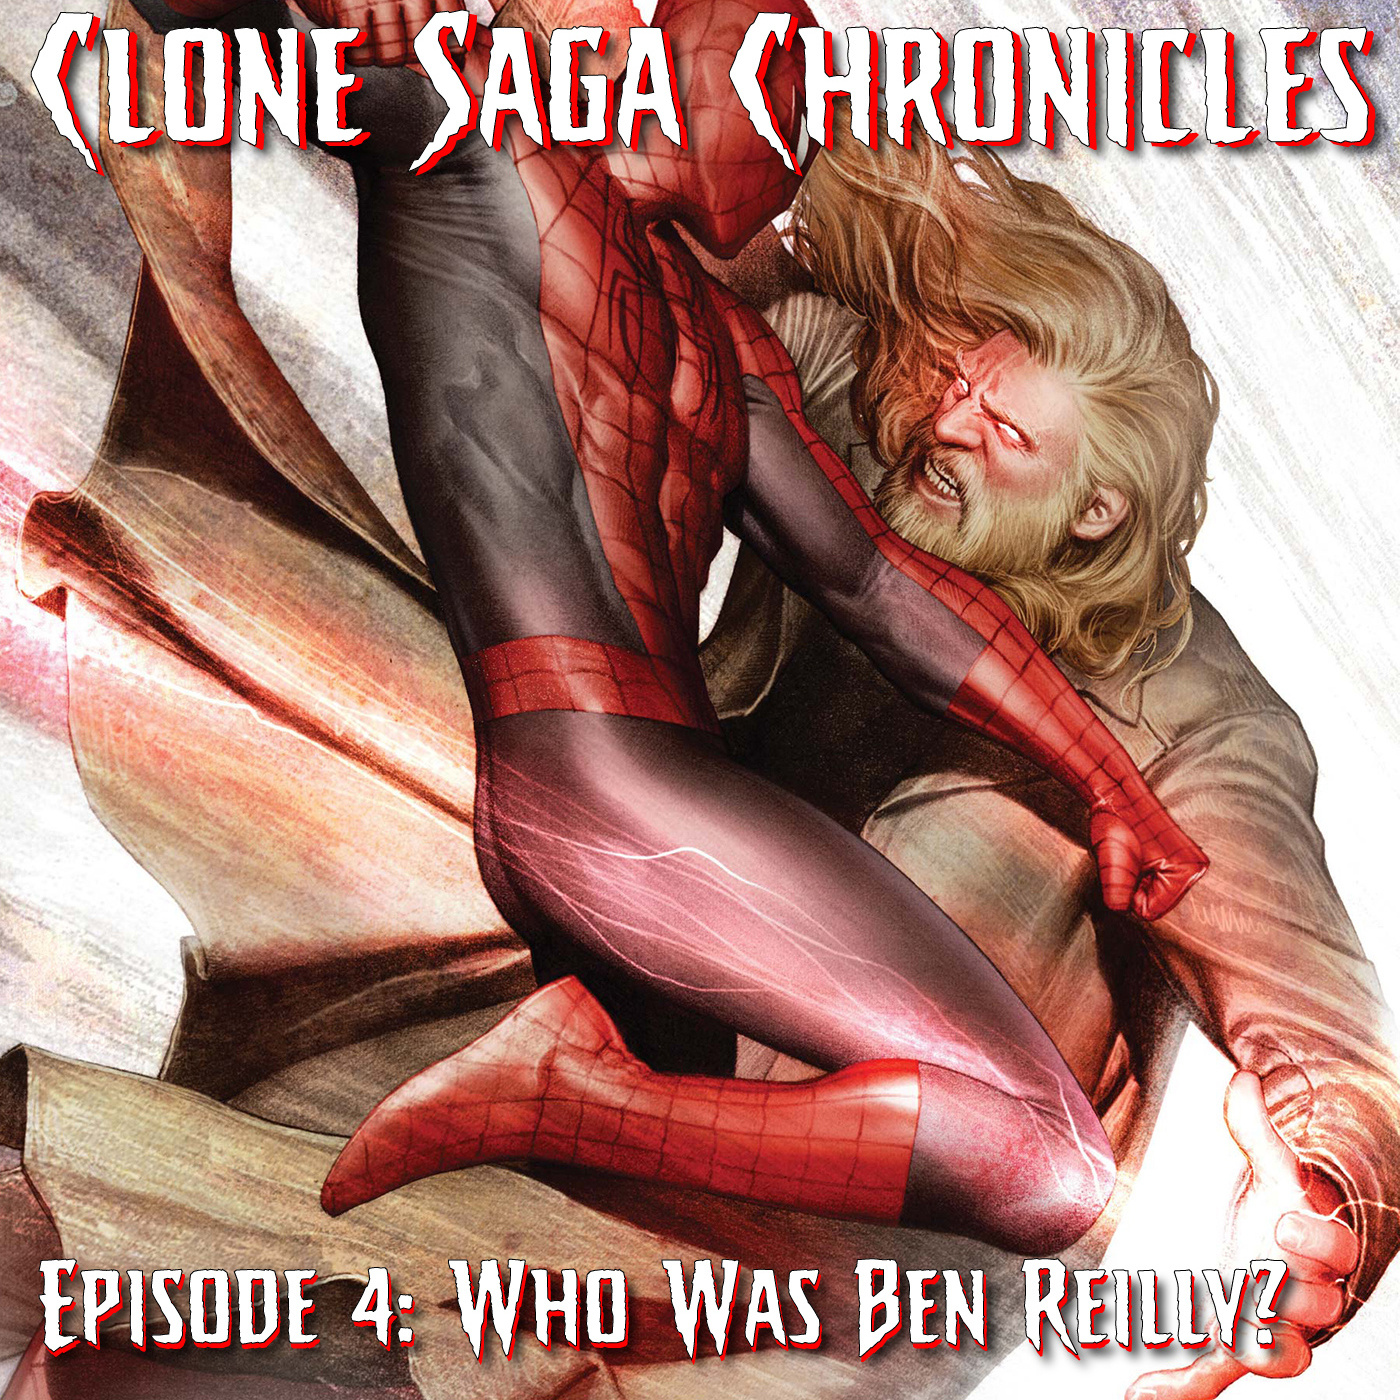 CSC Episode 4: Who WAS Ben Reilly?! (Cover Date: Dec 2009-Jan 2010)